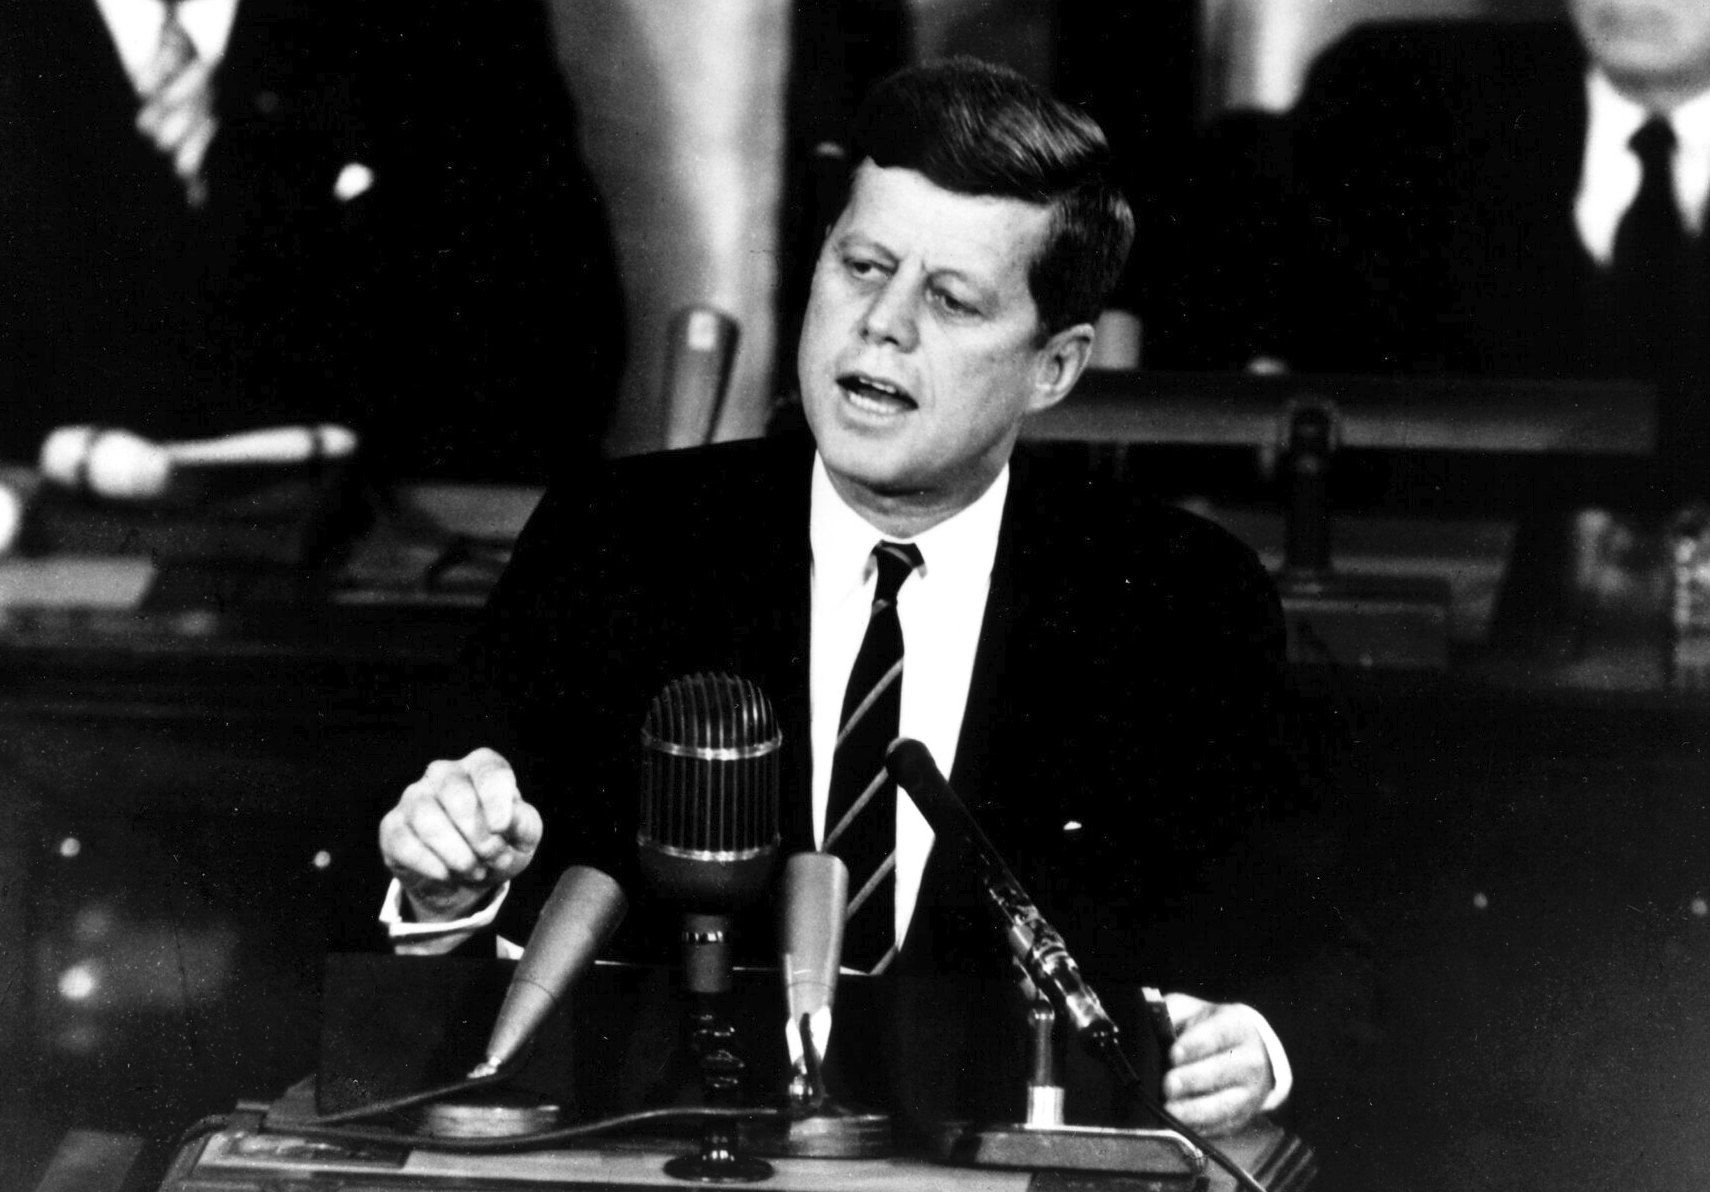 When John F. Kennedy pledged to send a man to the moon